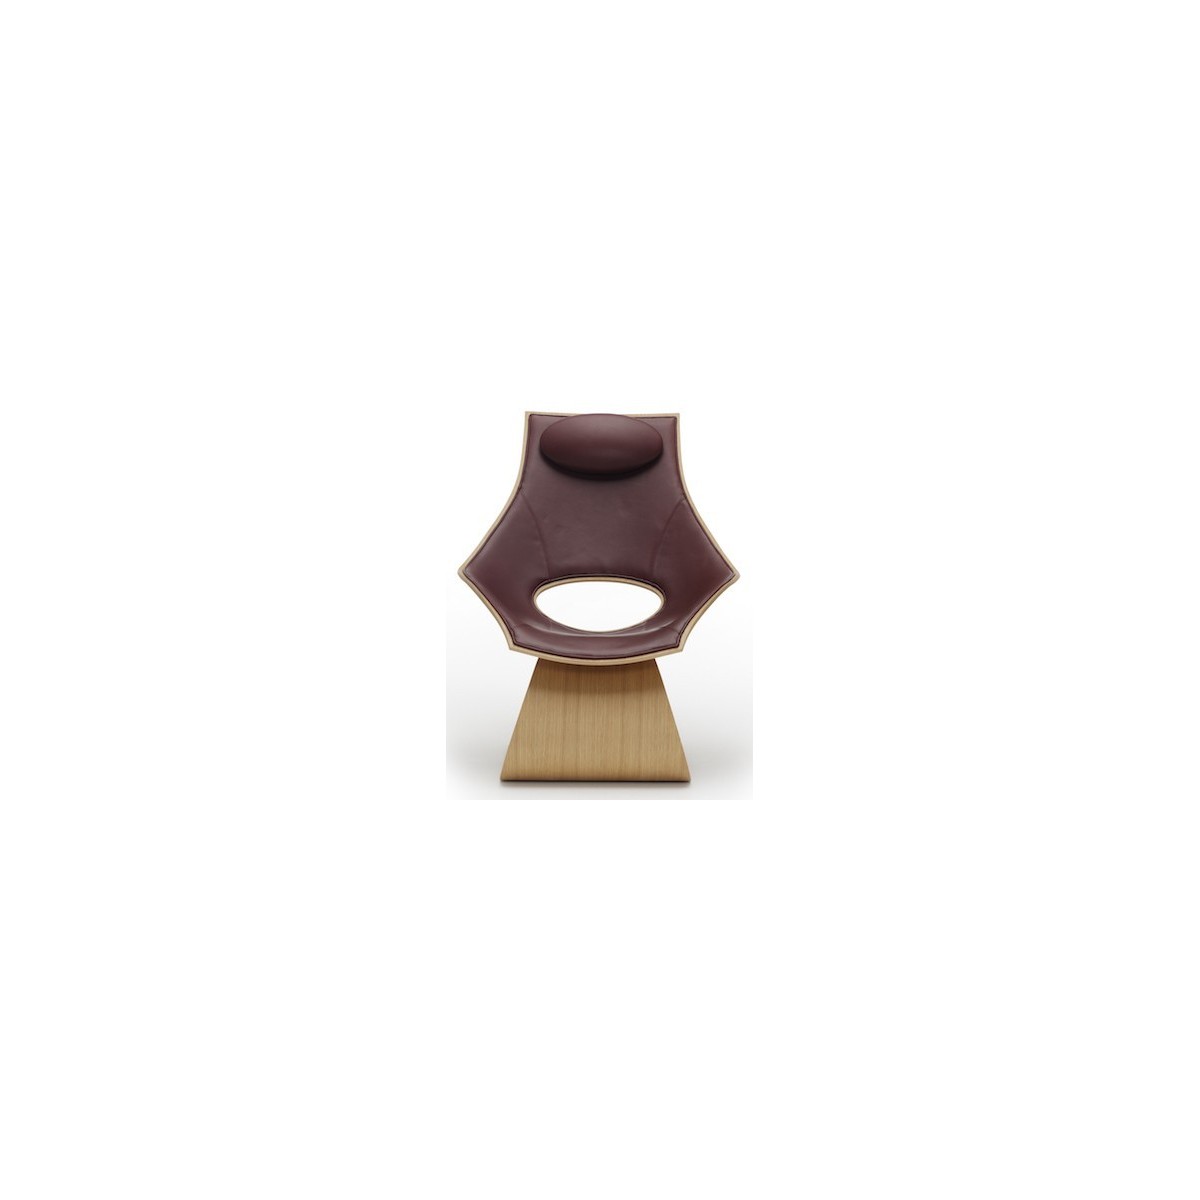 lacquered oak + Thor 332 leather upholstery - Upholstered Dream chair